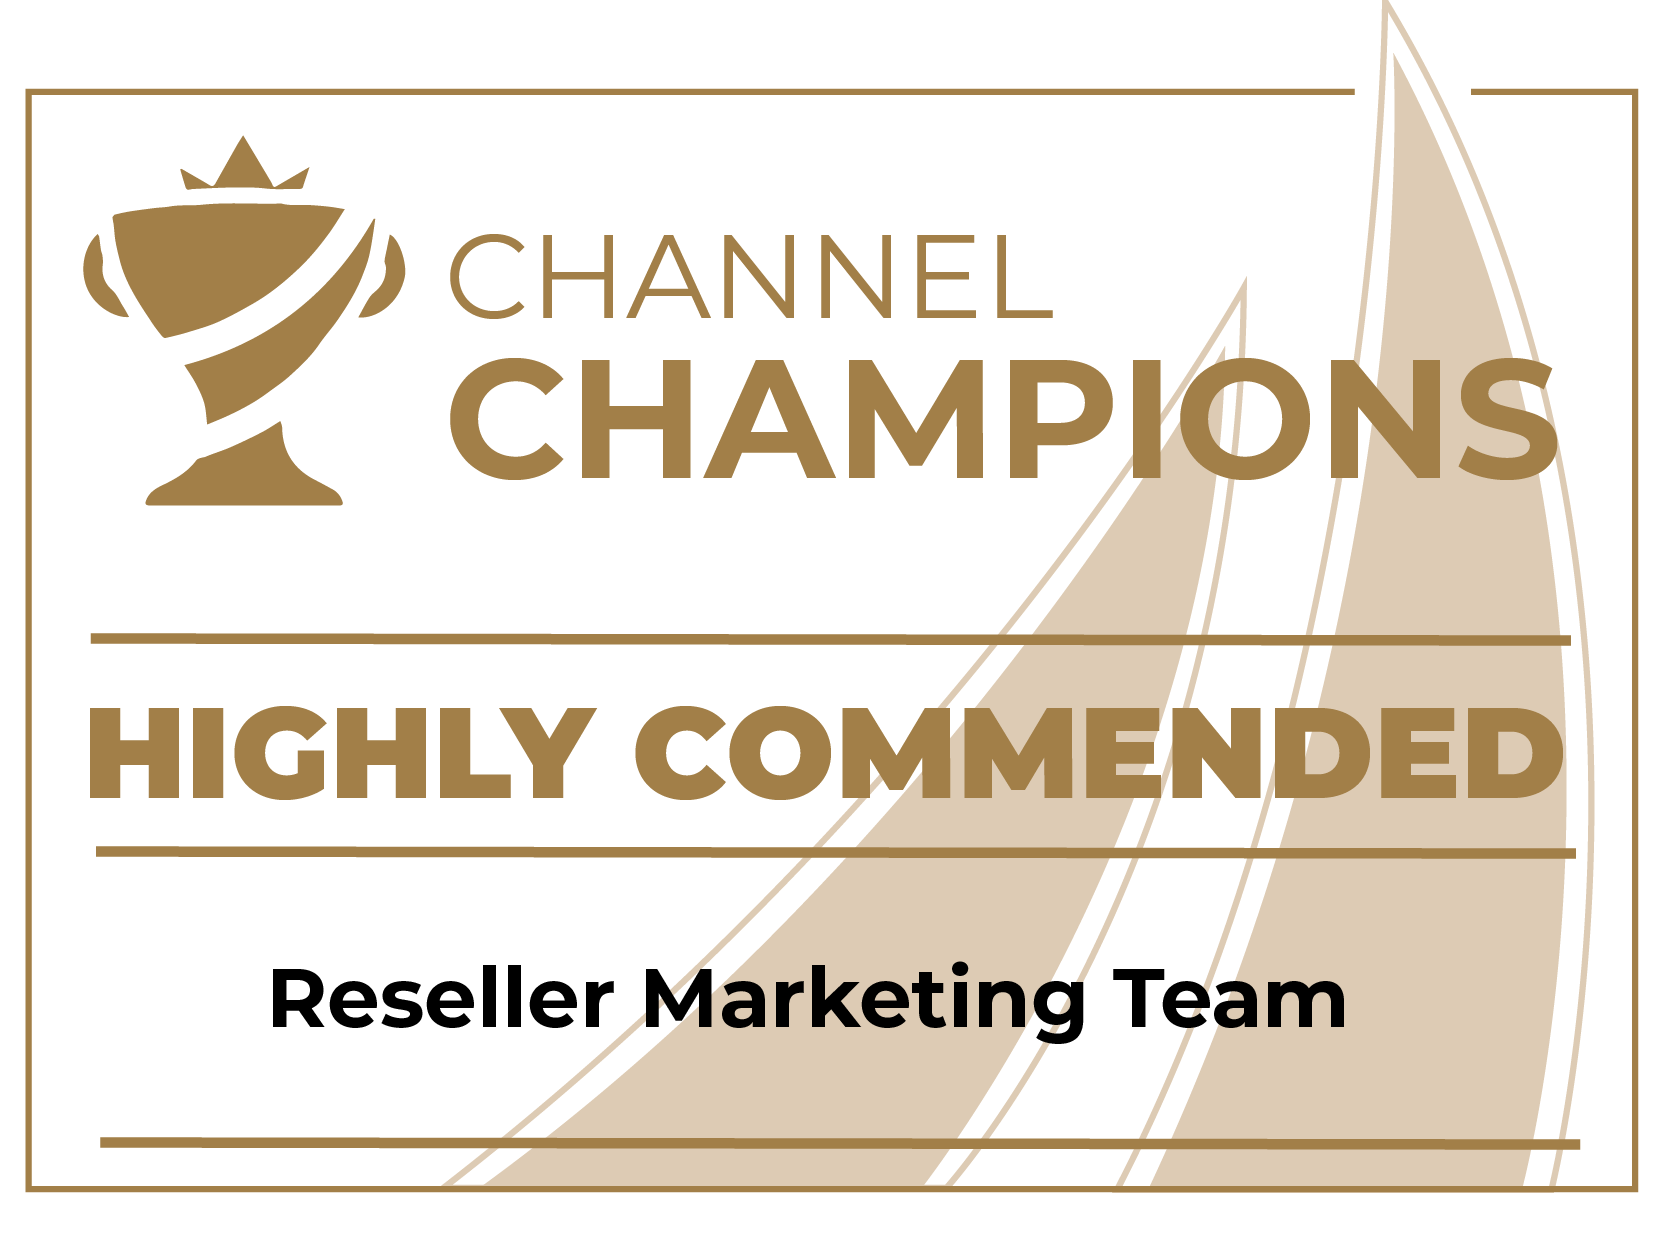 Wavenet Channel Champions 2021 - Reseller Marketing Team - Highly Commended